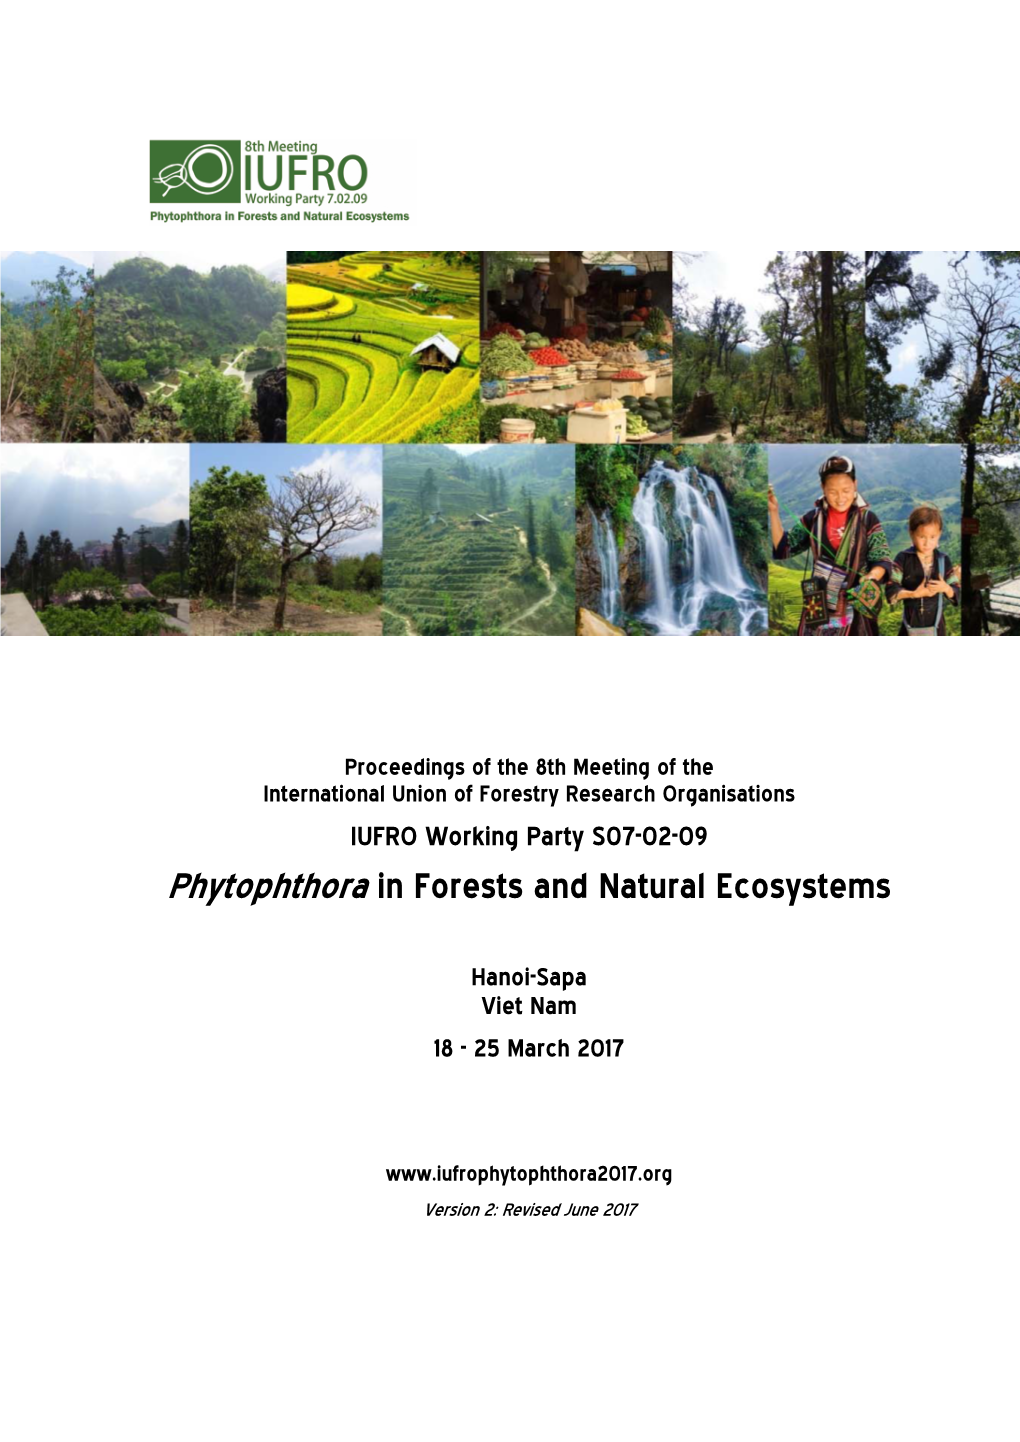 Phytophthora in Forests and Natural Ecosystems